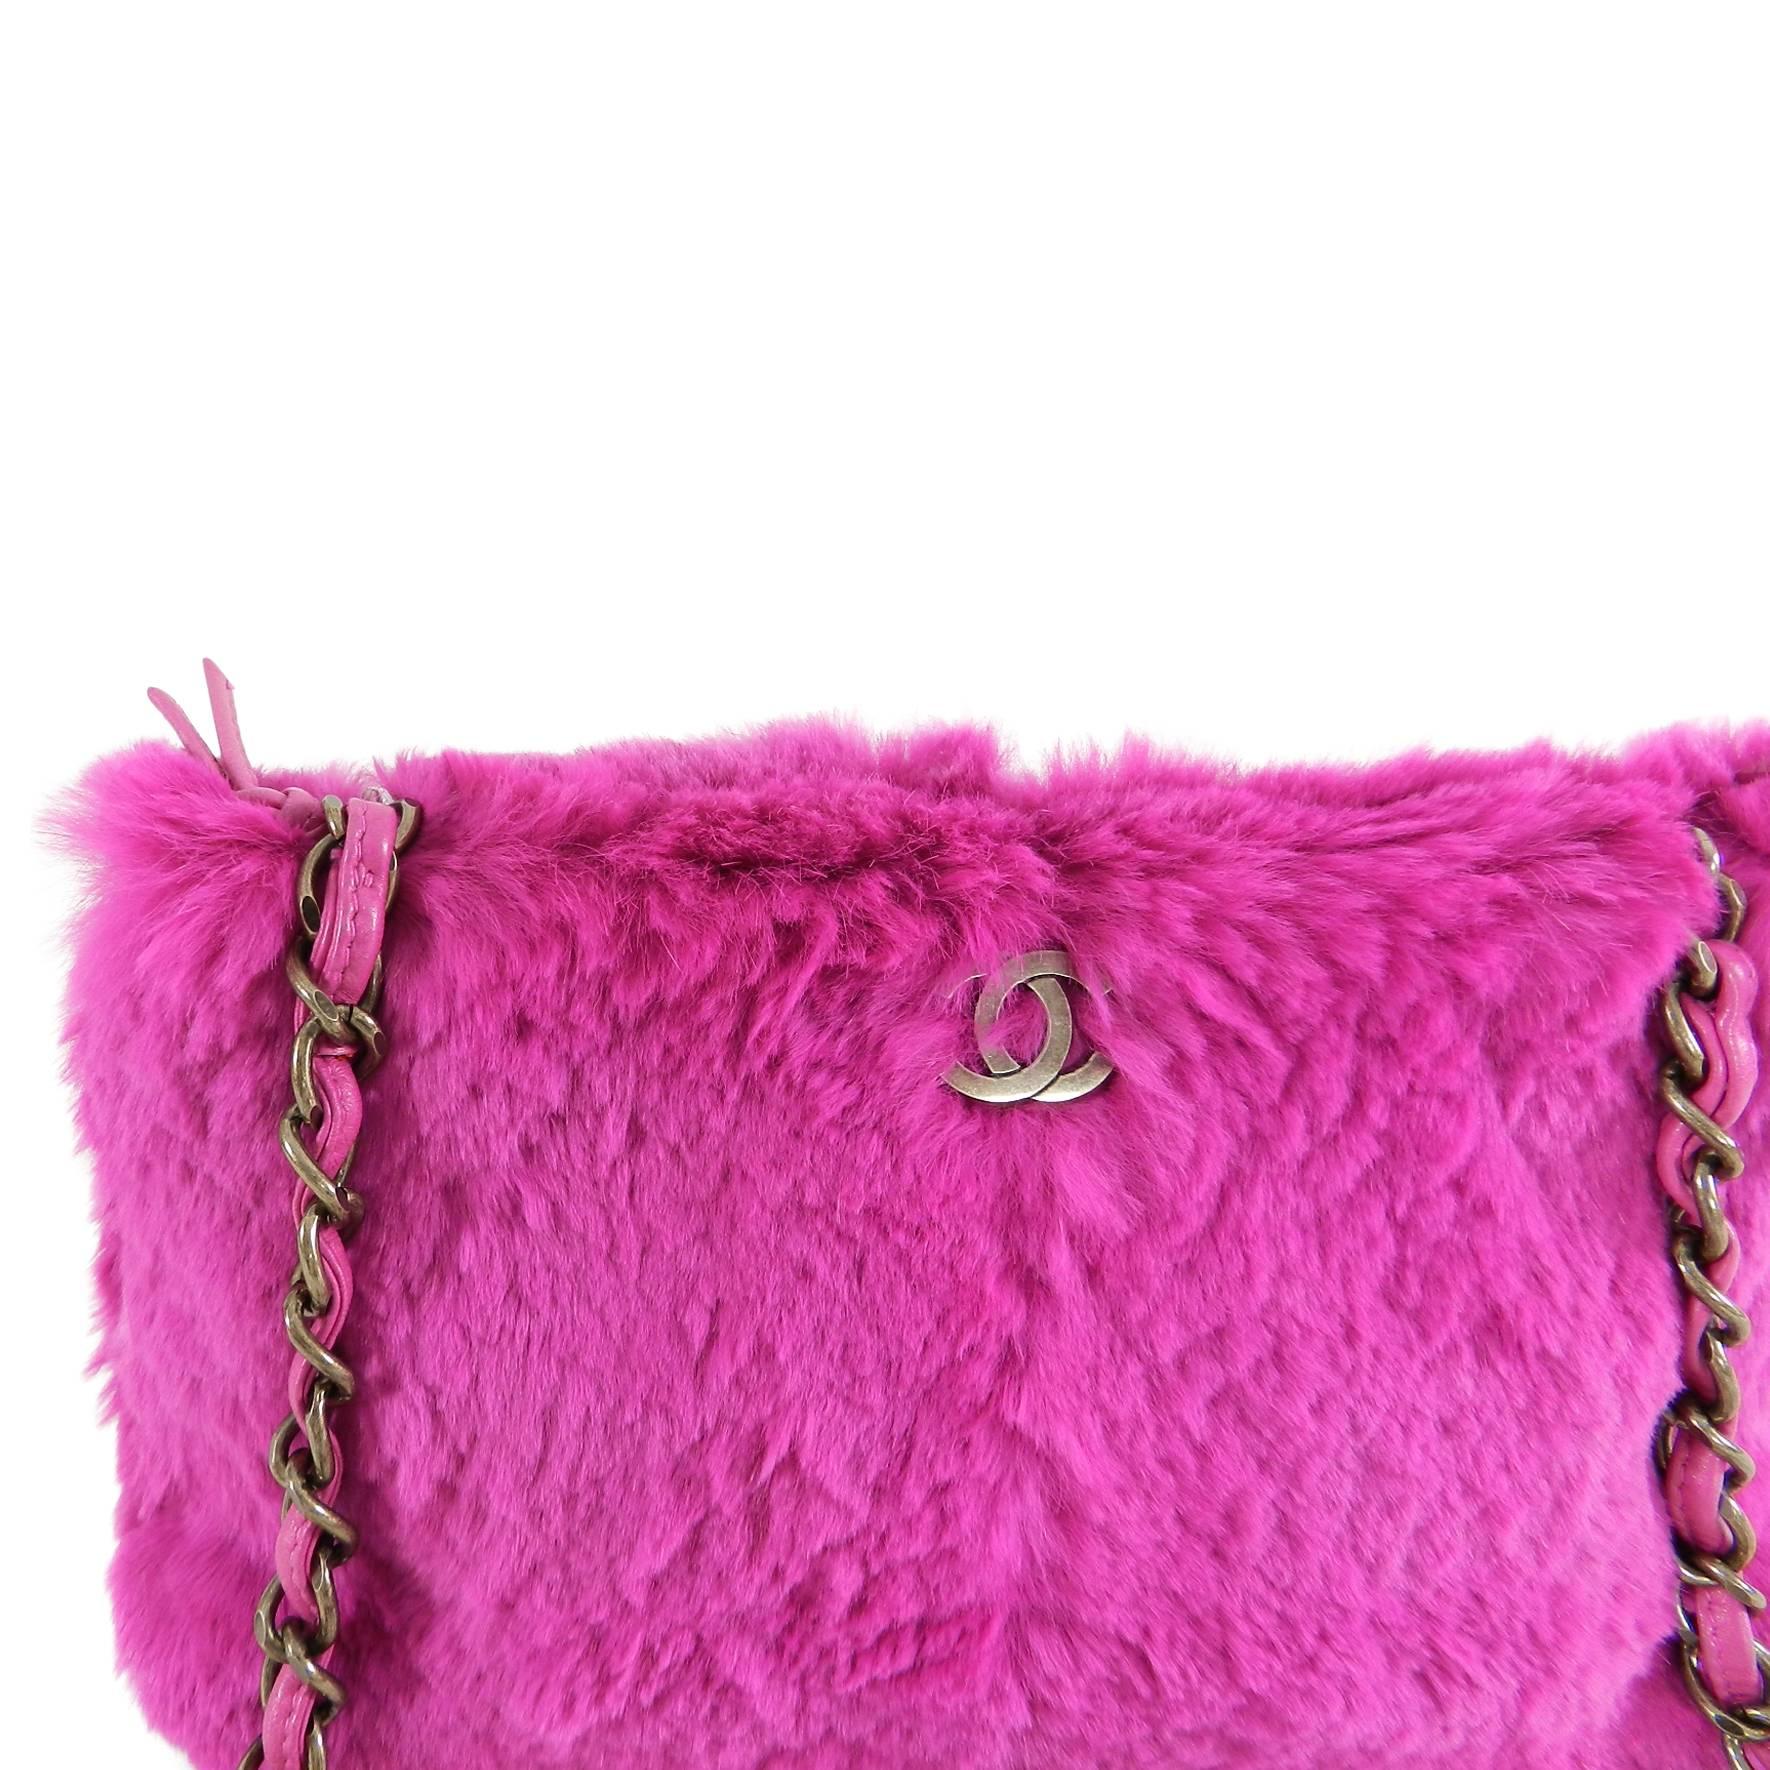 Chanel Hot Fuchsia Pink Rabbit Fur Bag.  Zippered top, CC logo at front, dark antiqued gold metal hardware.  Fabric lined interior is clean. Leather woven through chain strap shows some light wear. Includes authenticity card, duster, and care